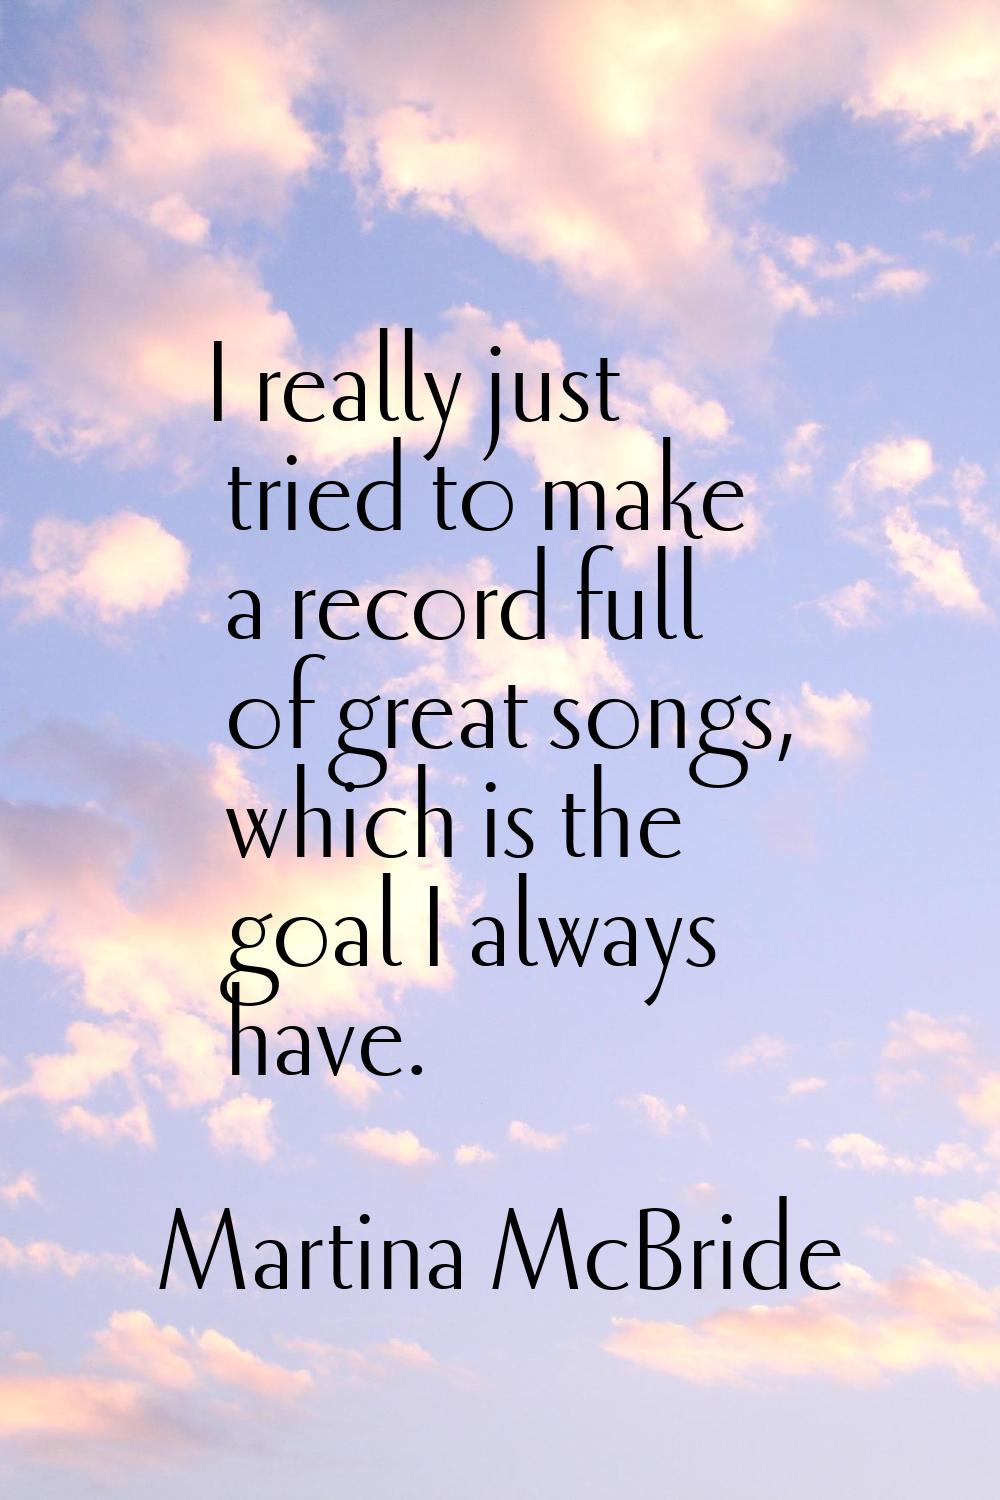 I really just tried to make a record full of great songs, which is the goal I always have.